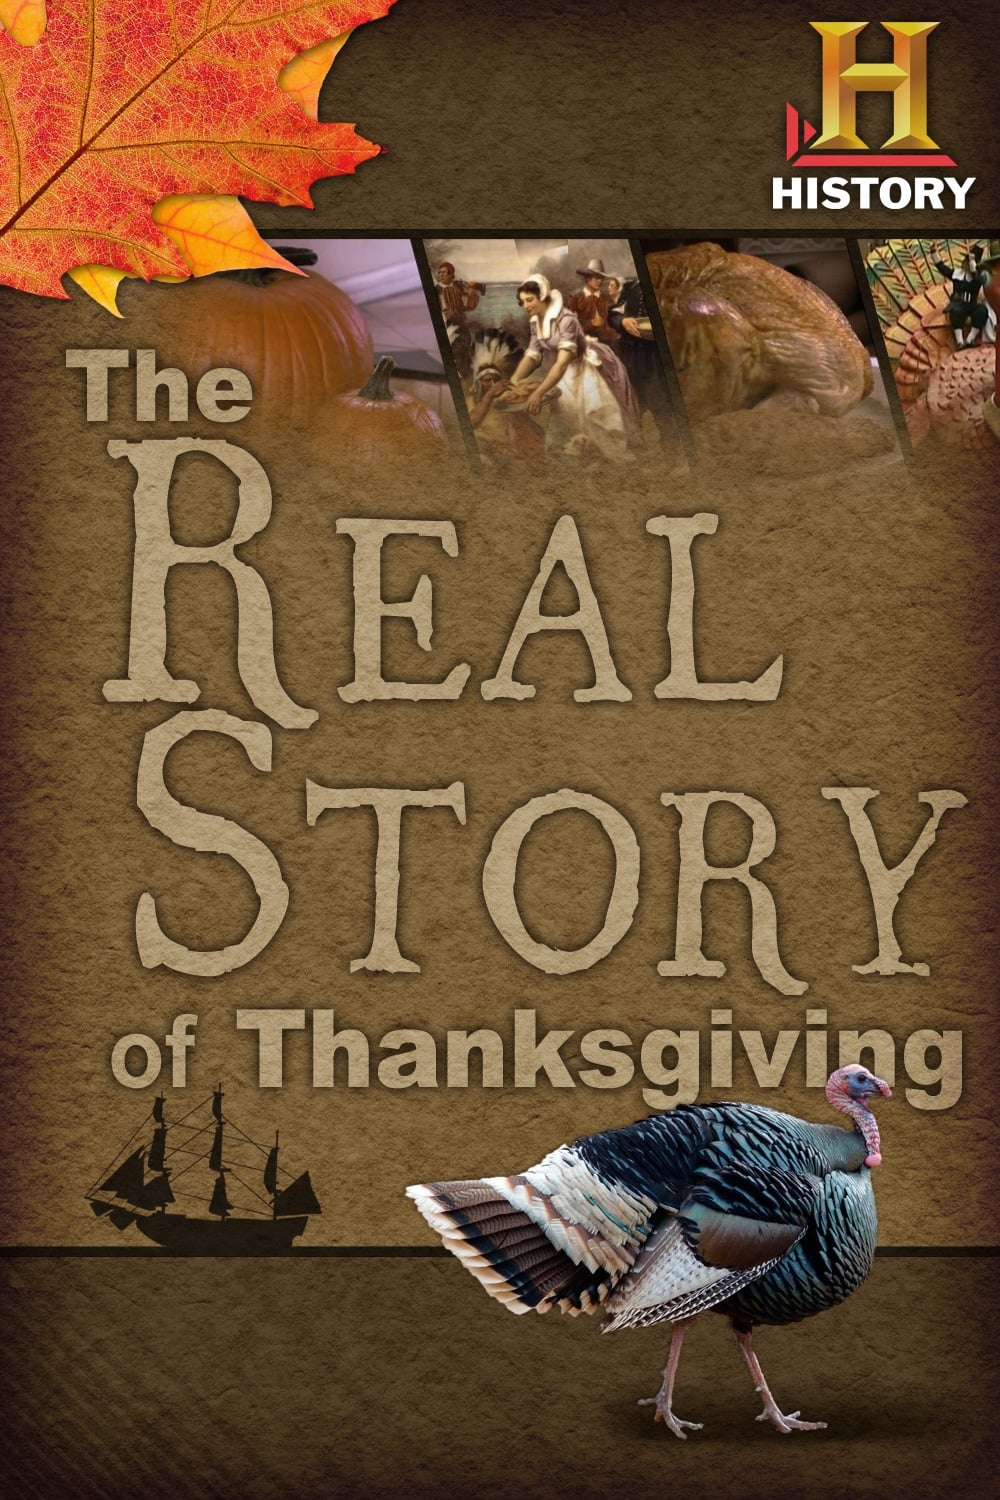 The Real Story of Thanksgiving